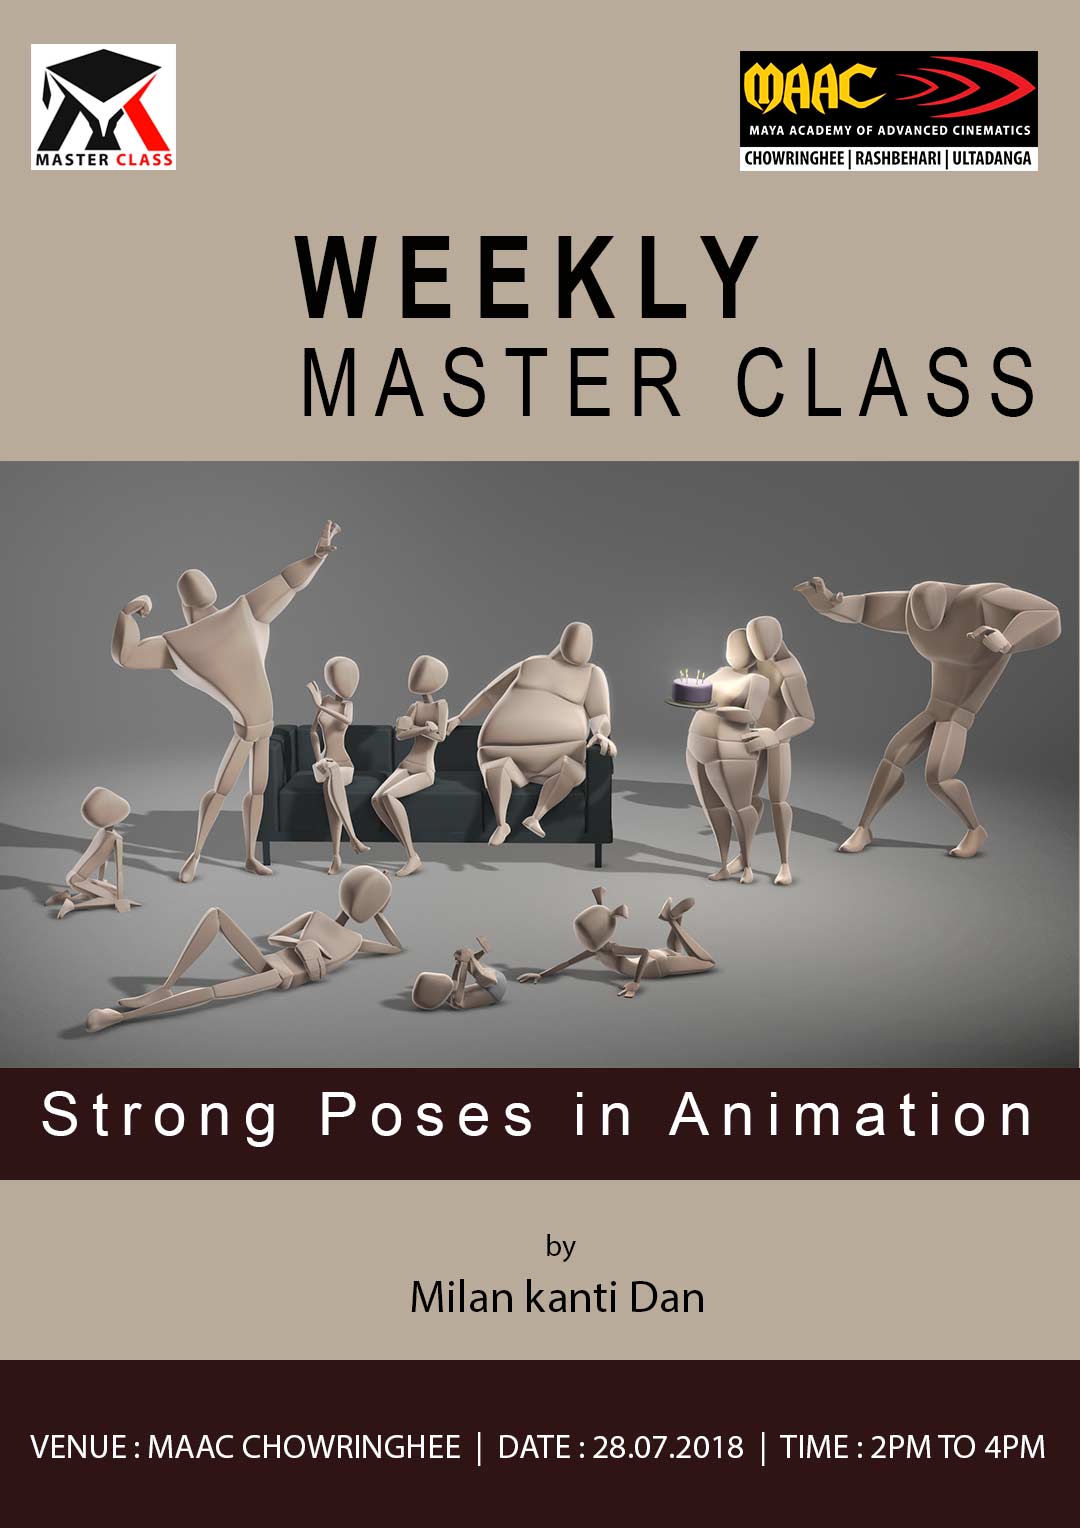 Weekly Master Class on Strong Poses in Animation